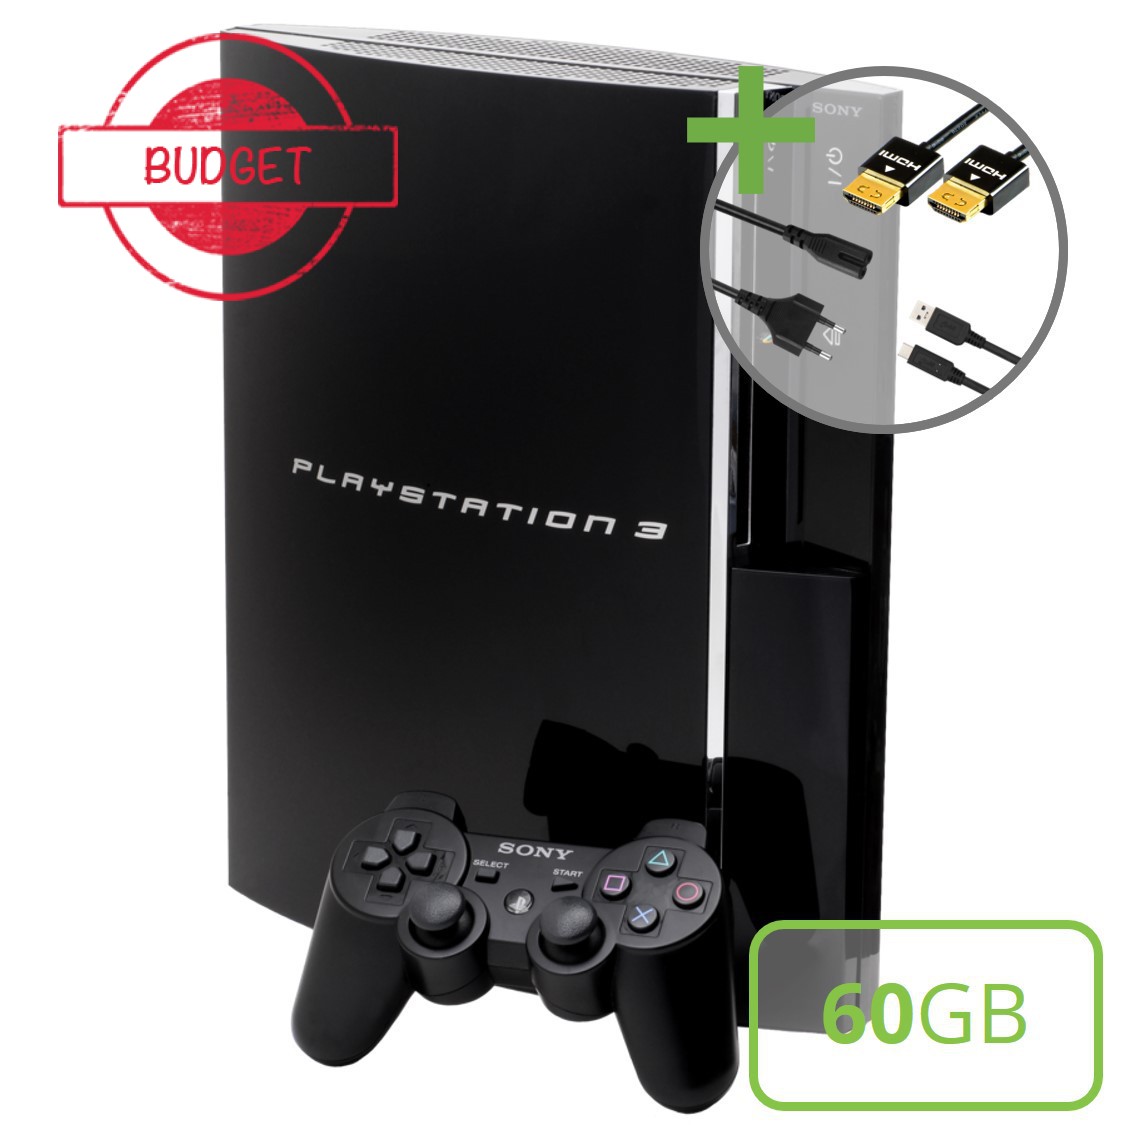 Sony PlayStation 3 Phat (60GB) Starter Pack - Sixaxis Edition - Budget - Playstation 3 Hardware - 2